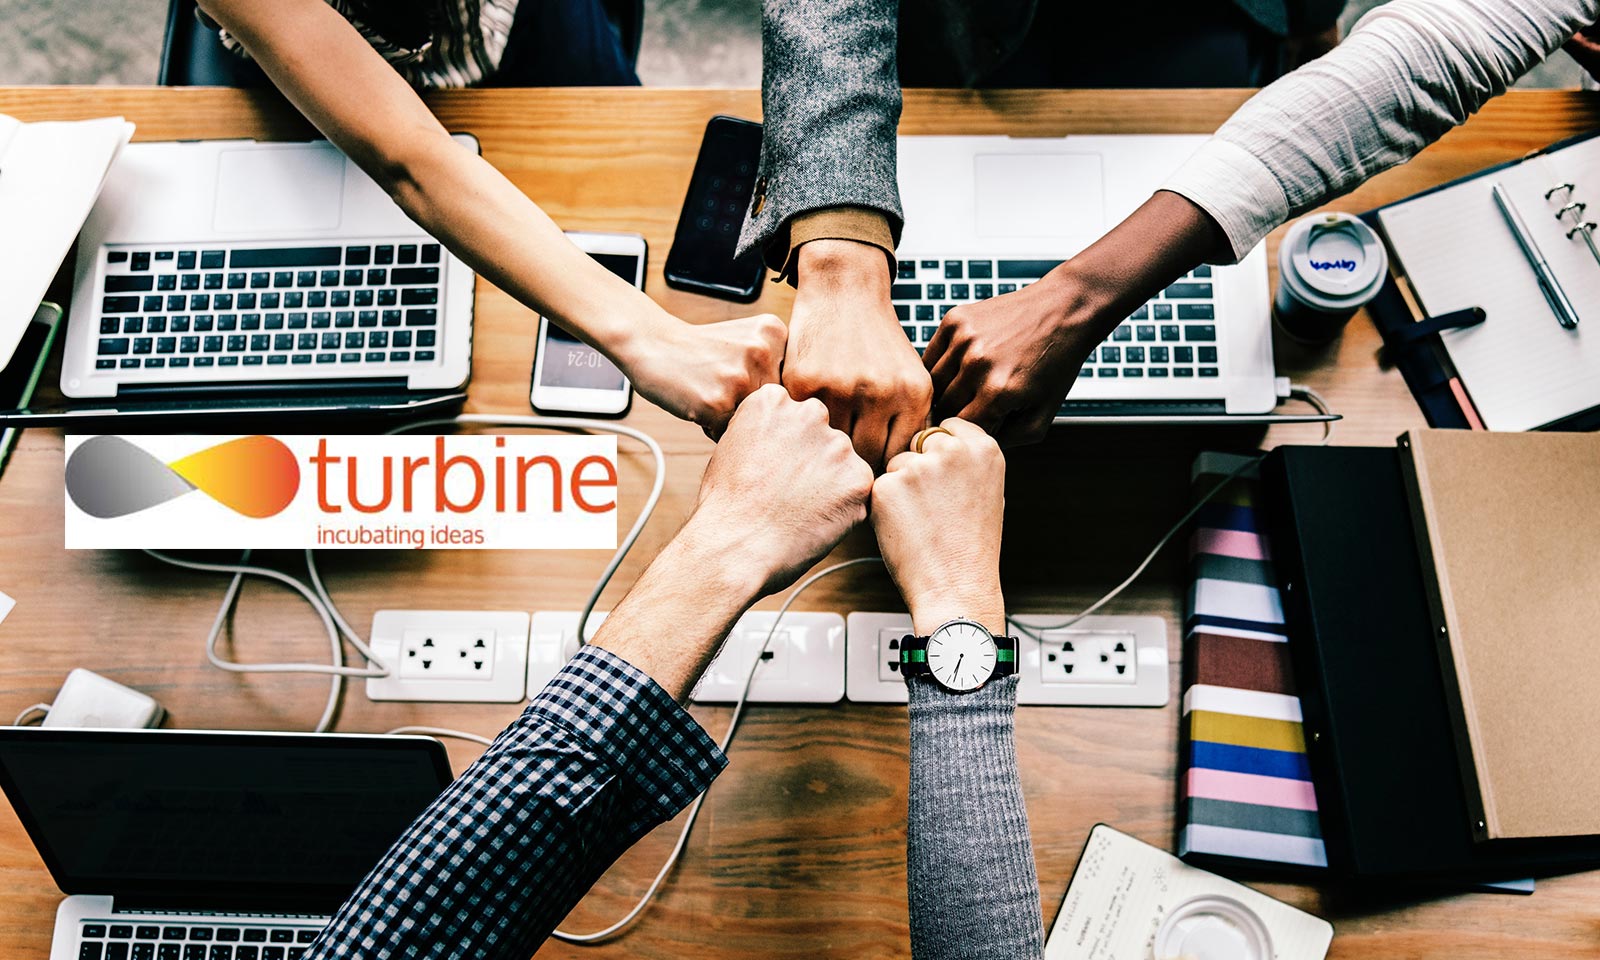 Test Drive of the Turbine: launch of the startup training program